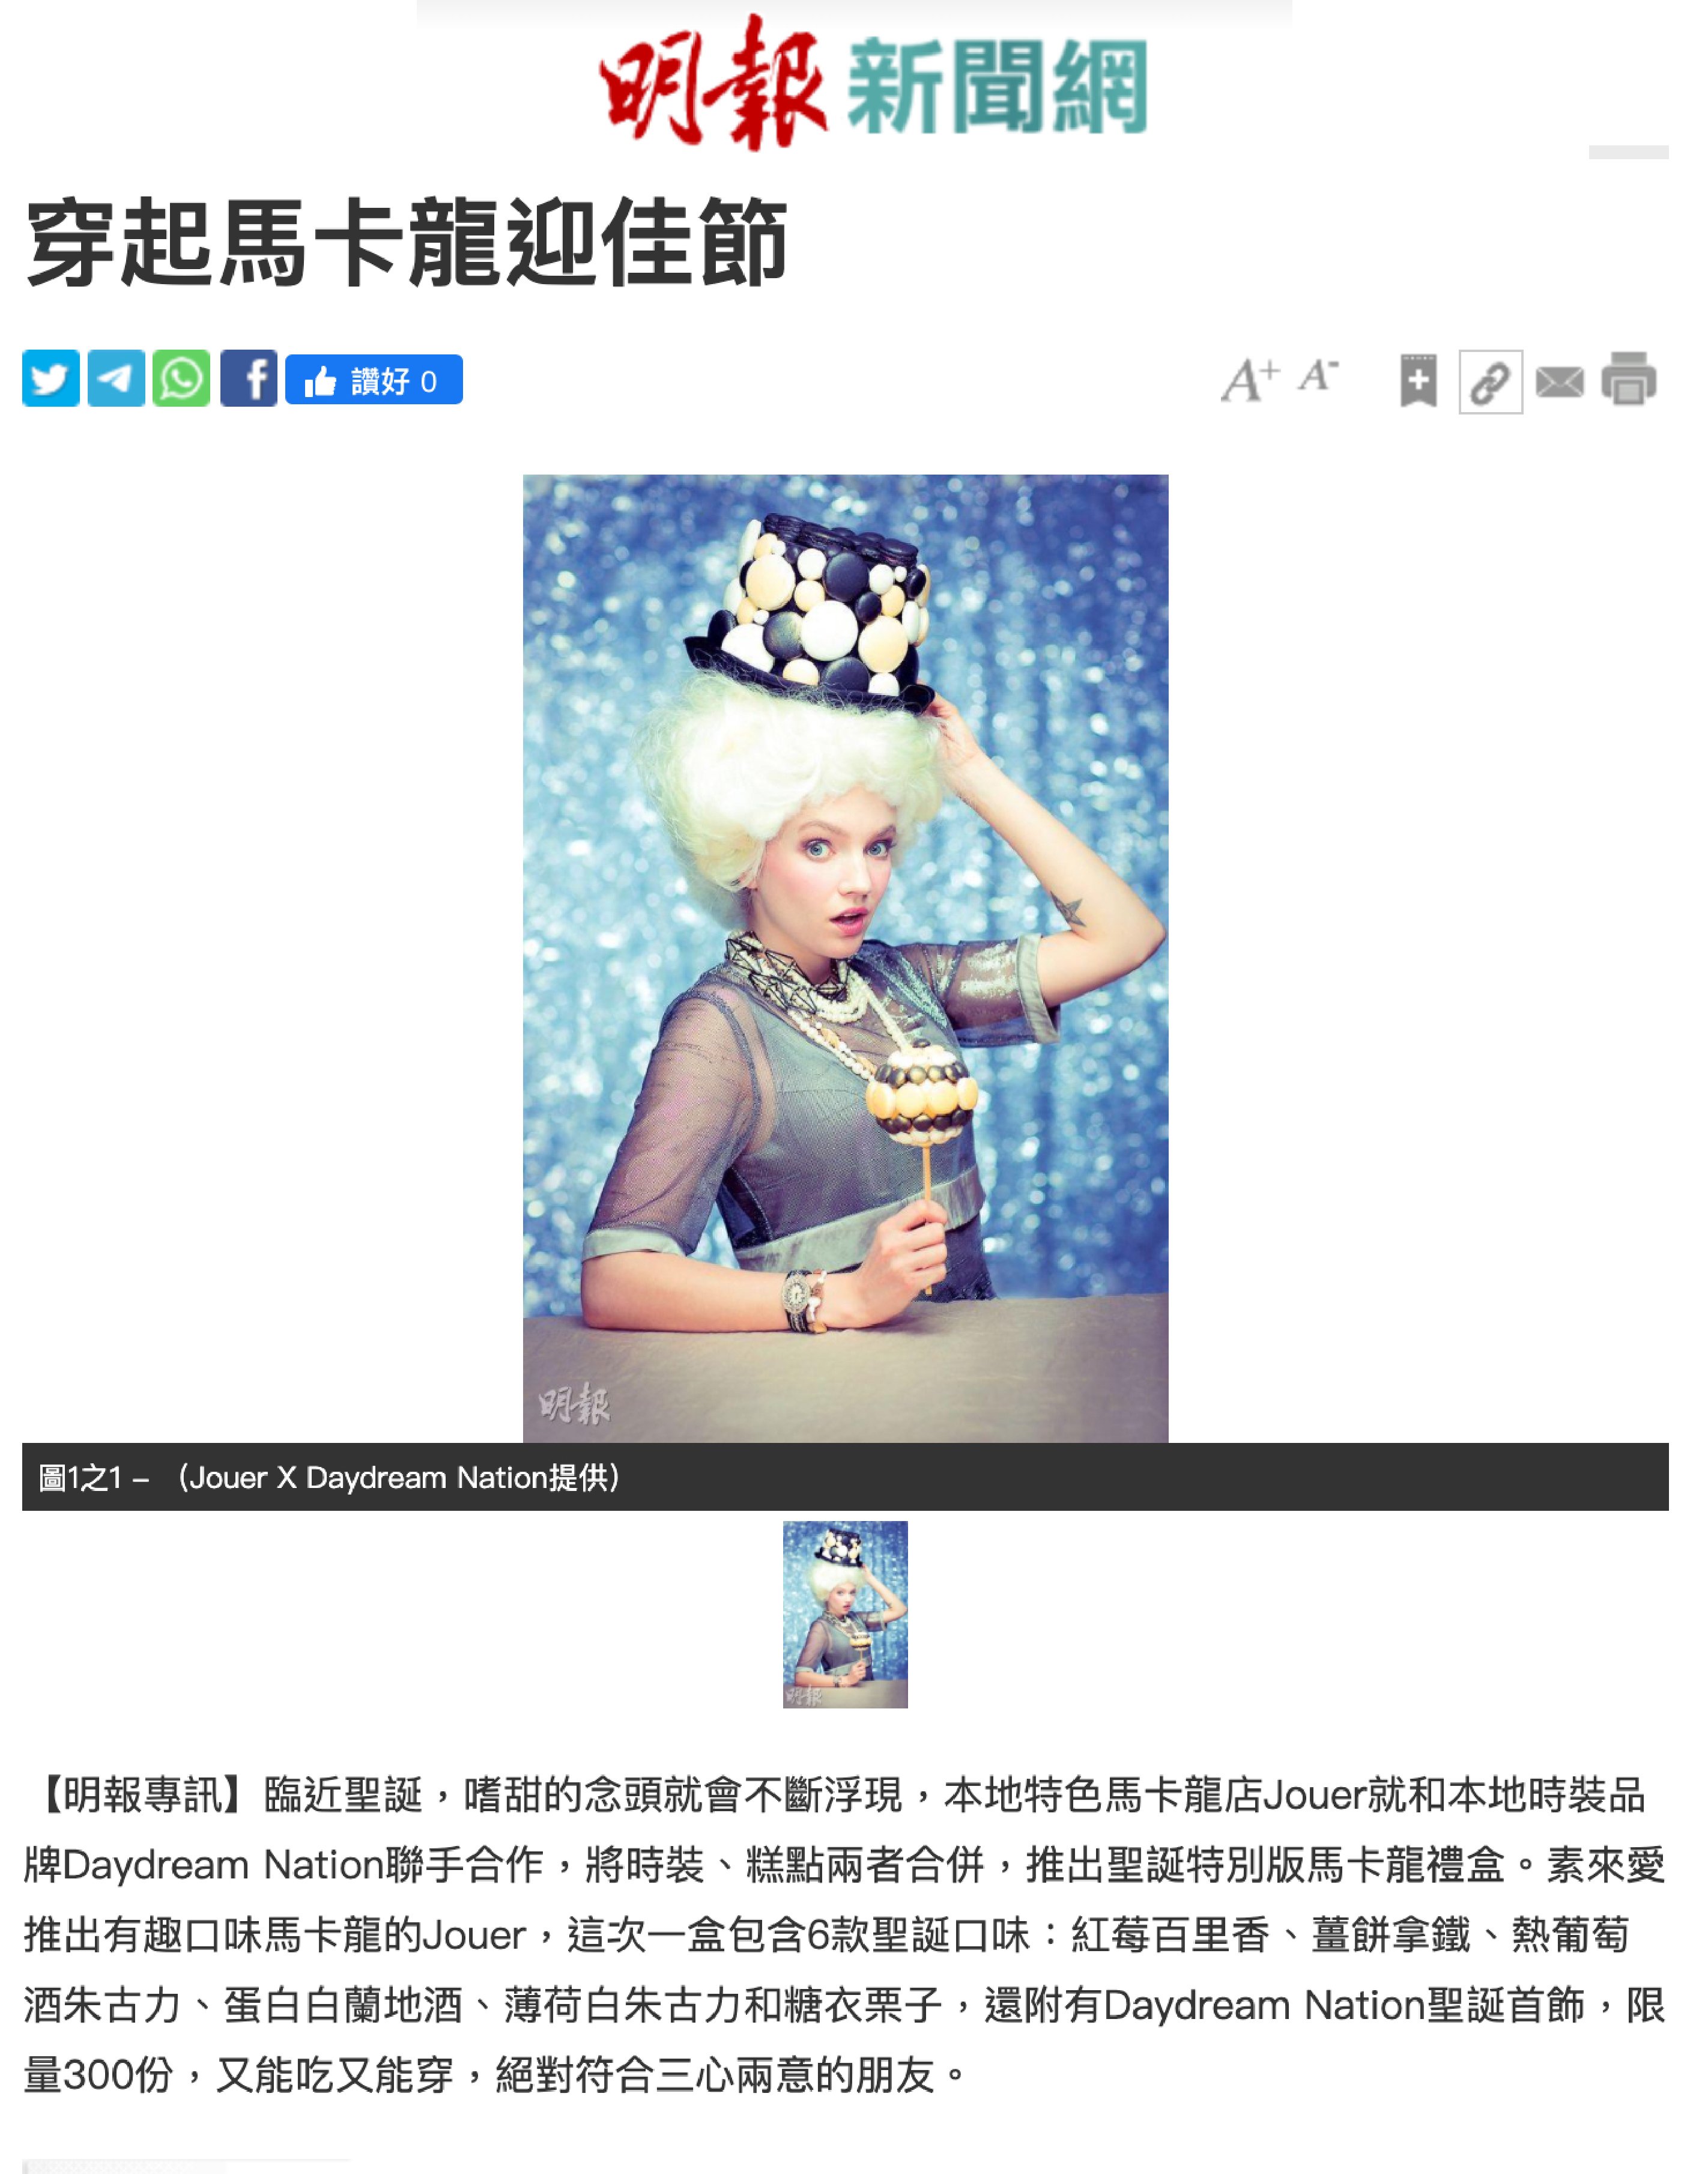 Ming Pao Daily_11Dec-01